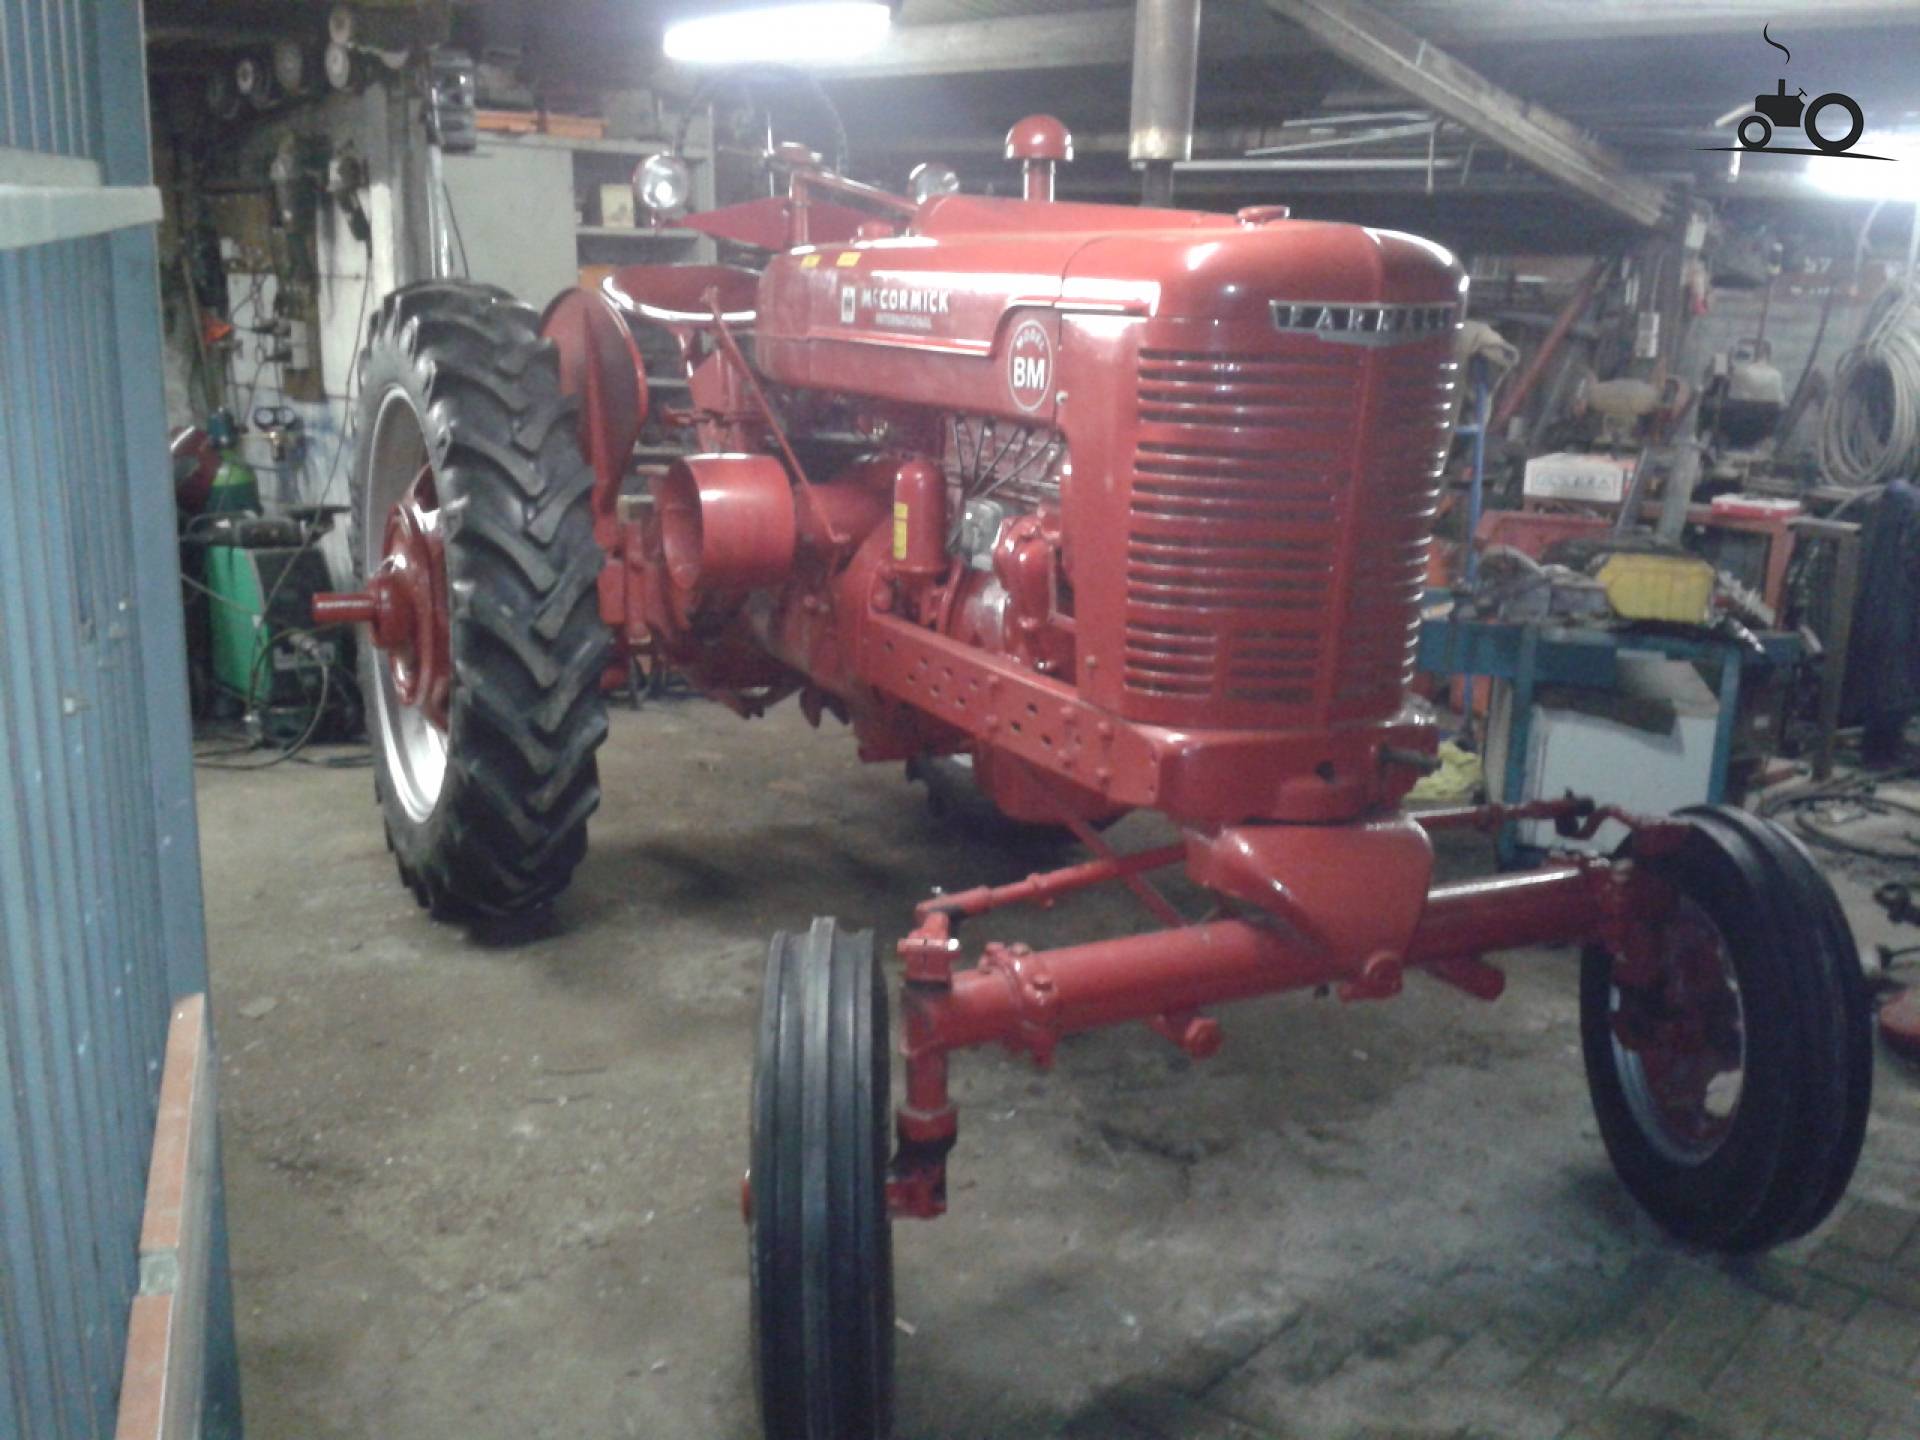 Farmall BM Specs and data - Everything about the Farmall BM